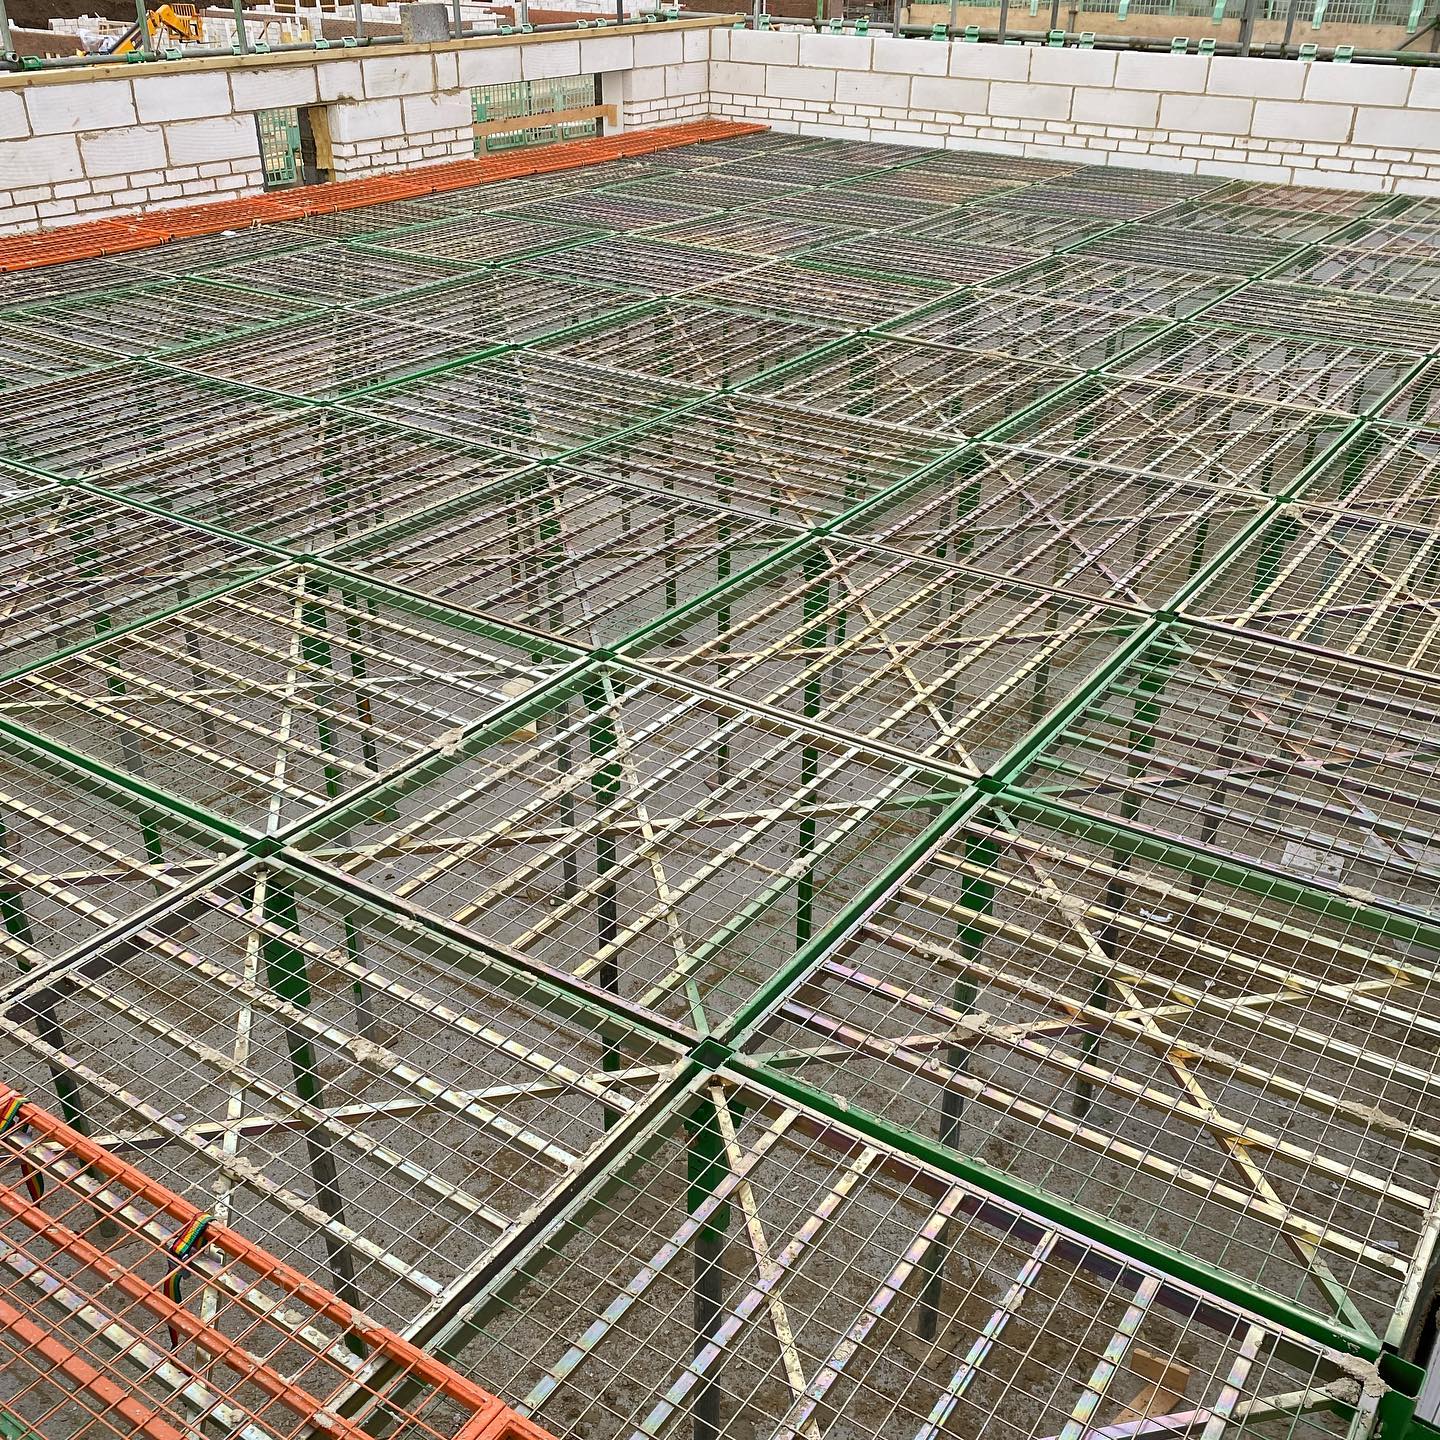 We are proud to announce that we have recently partnered up with G-Deck and can now offer a full supply and fit service with our hybrid safety decking system. This system has a load bearing of 600kg per m2 and is 3 times stronger than traditional tube and fitting birdcages. #scaffolding #scaffold #scaffolder #connect #connectscaffolding #scafflife #construction #industry #instagood #gdeck